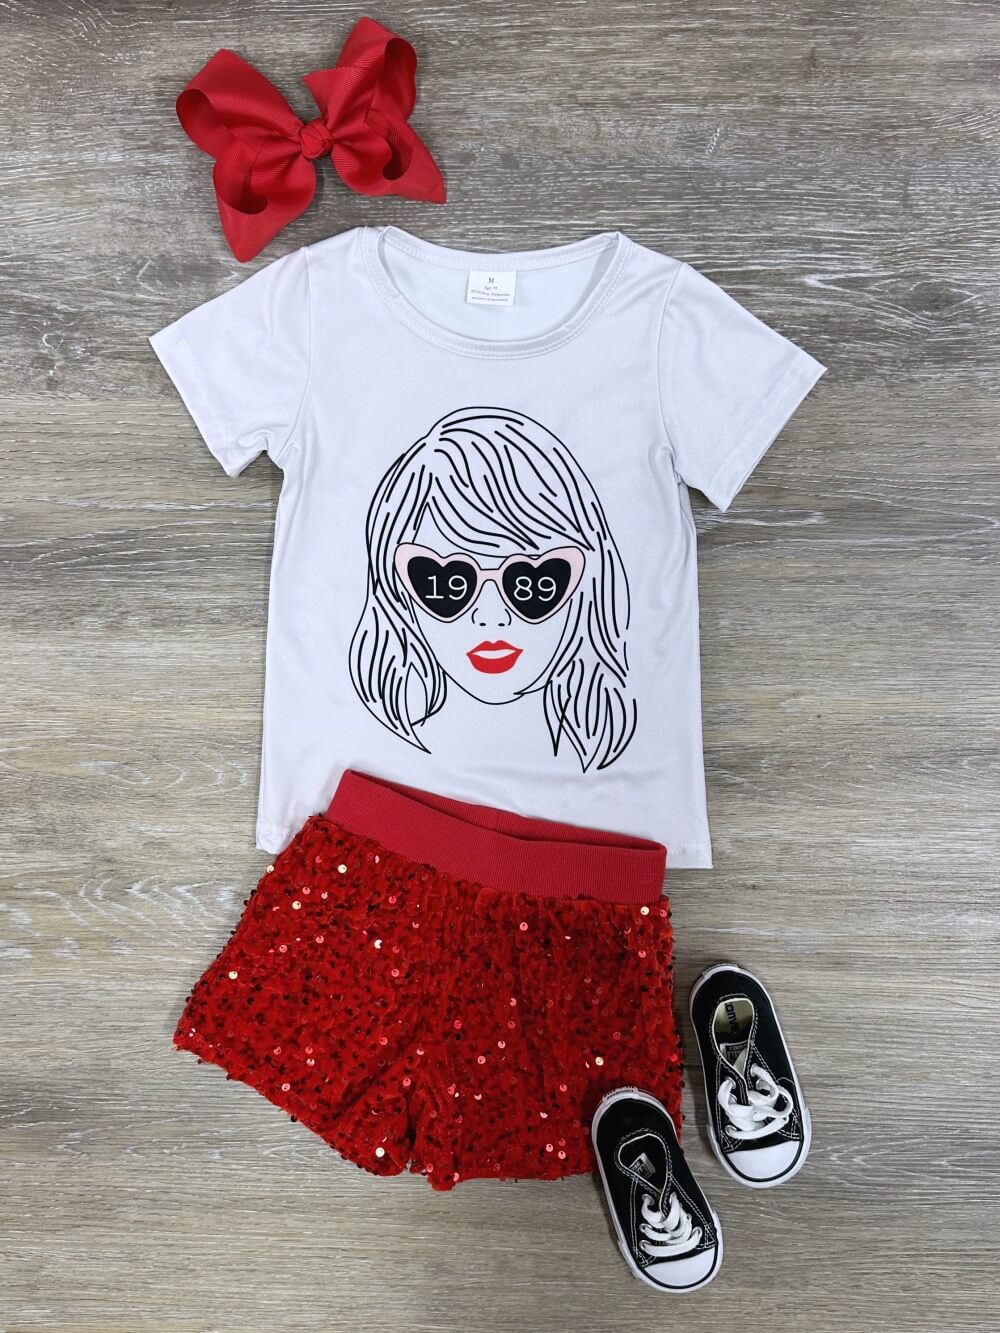 1989 Heart Glasses Red Sequin Girls Shorts Outfit - Sydney So Sweet